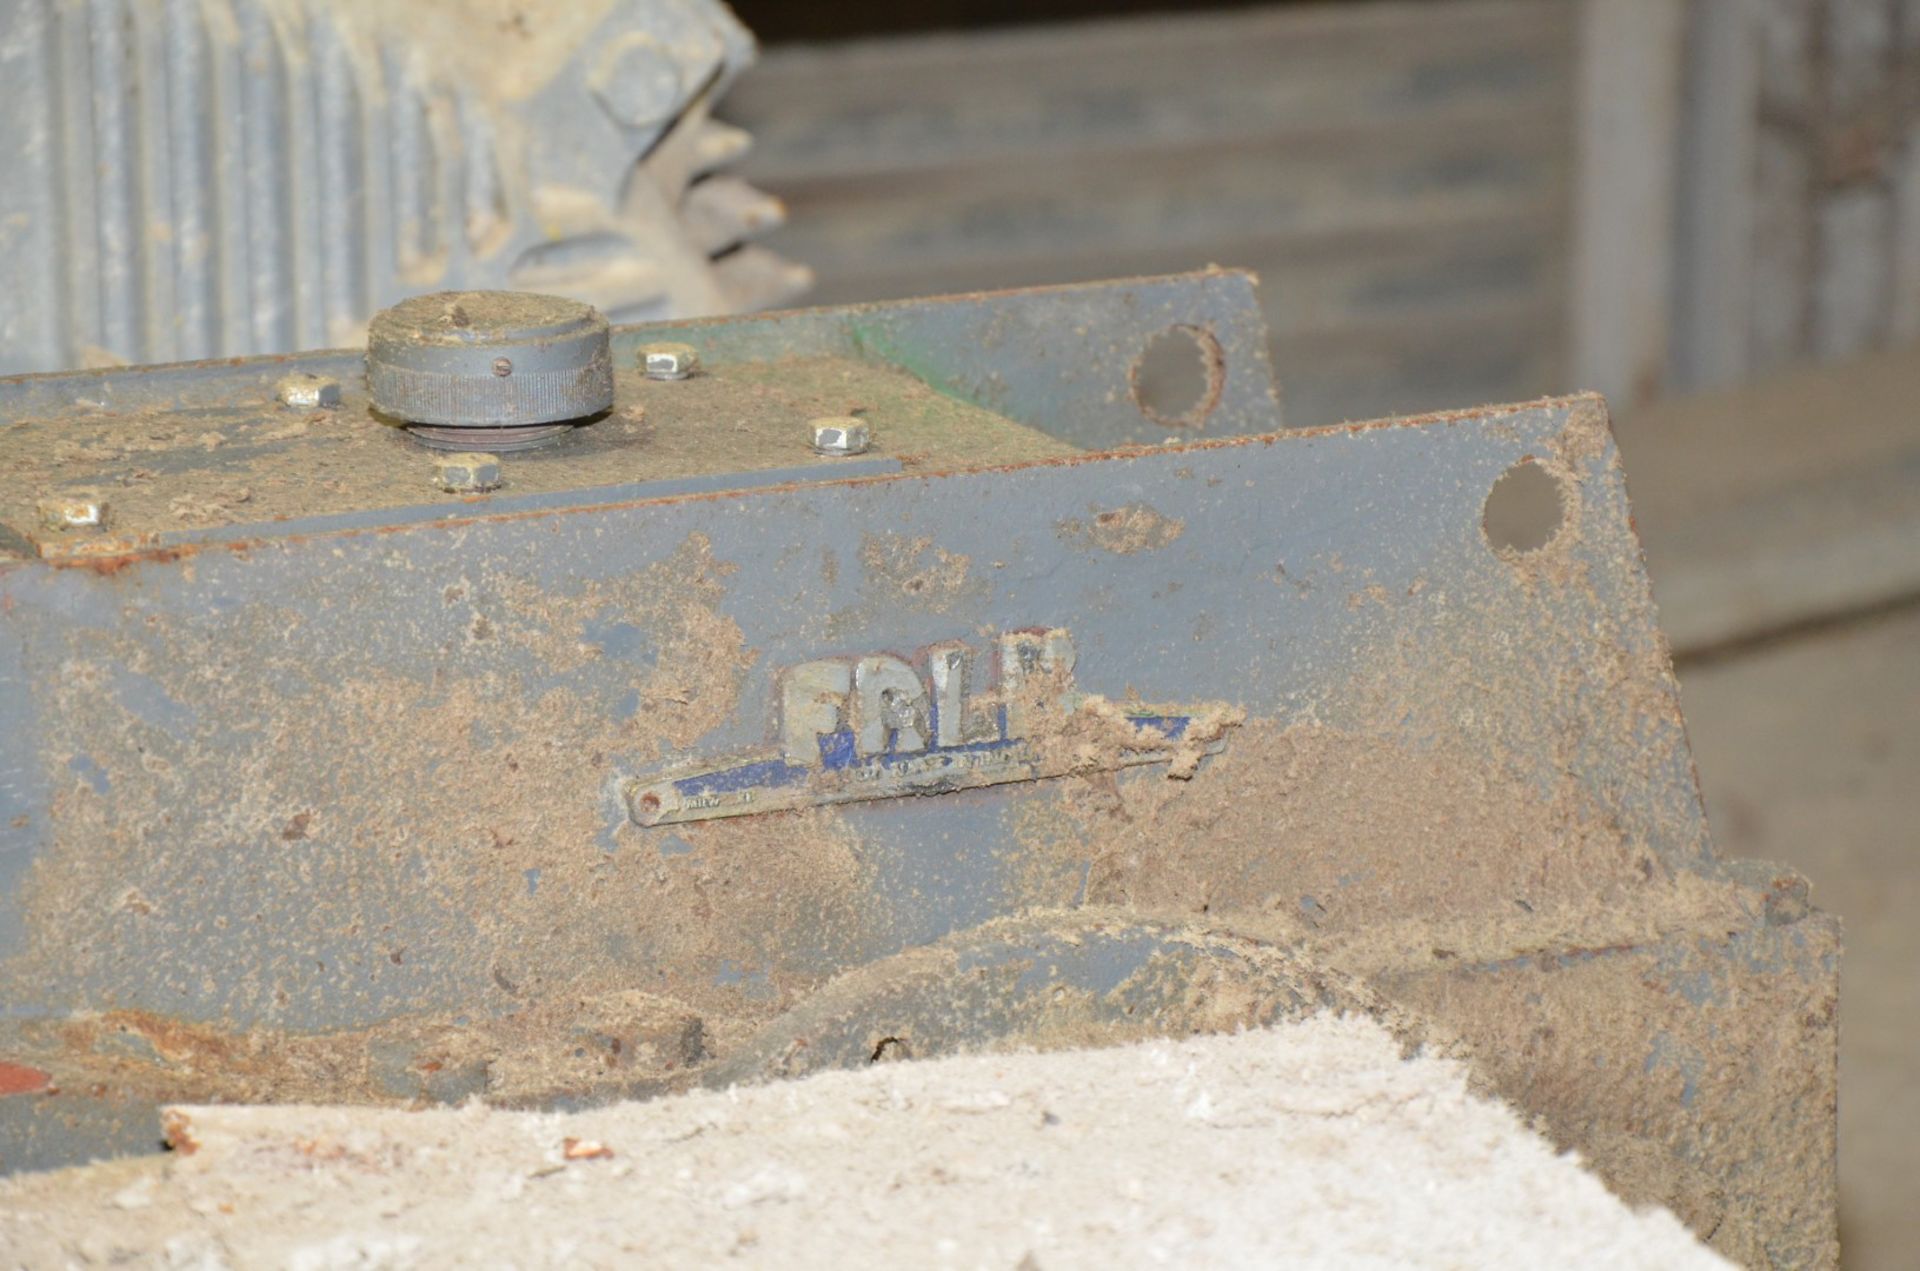 FALK 345A-AB GEARBOX WITH 5.615:1 RATIO (CI) [RIGGING FEE FOR LOT #453 - $650 USD PLUS APPLICABLE